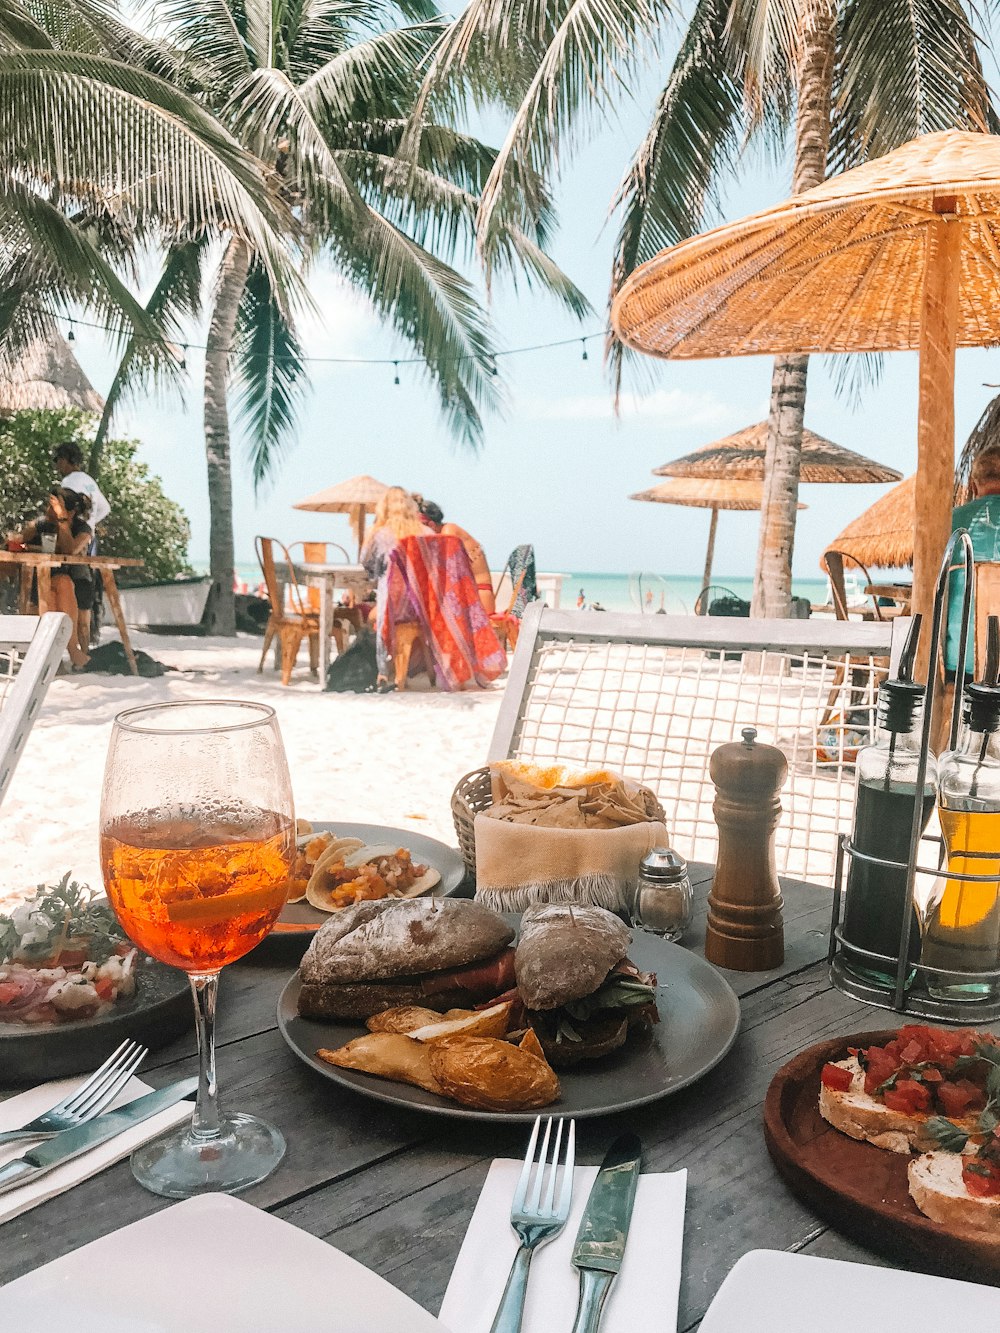 food on table at the beach during day